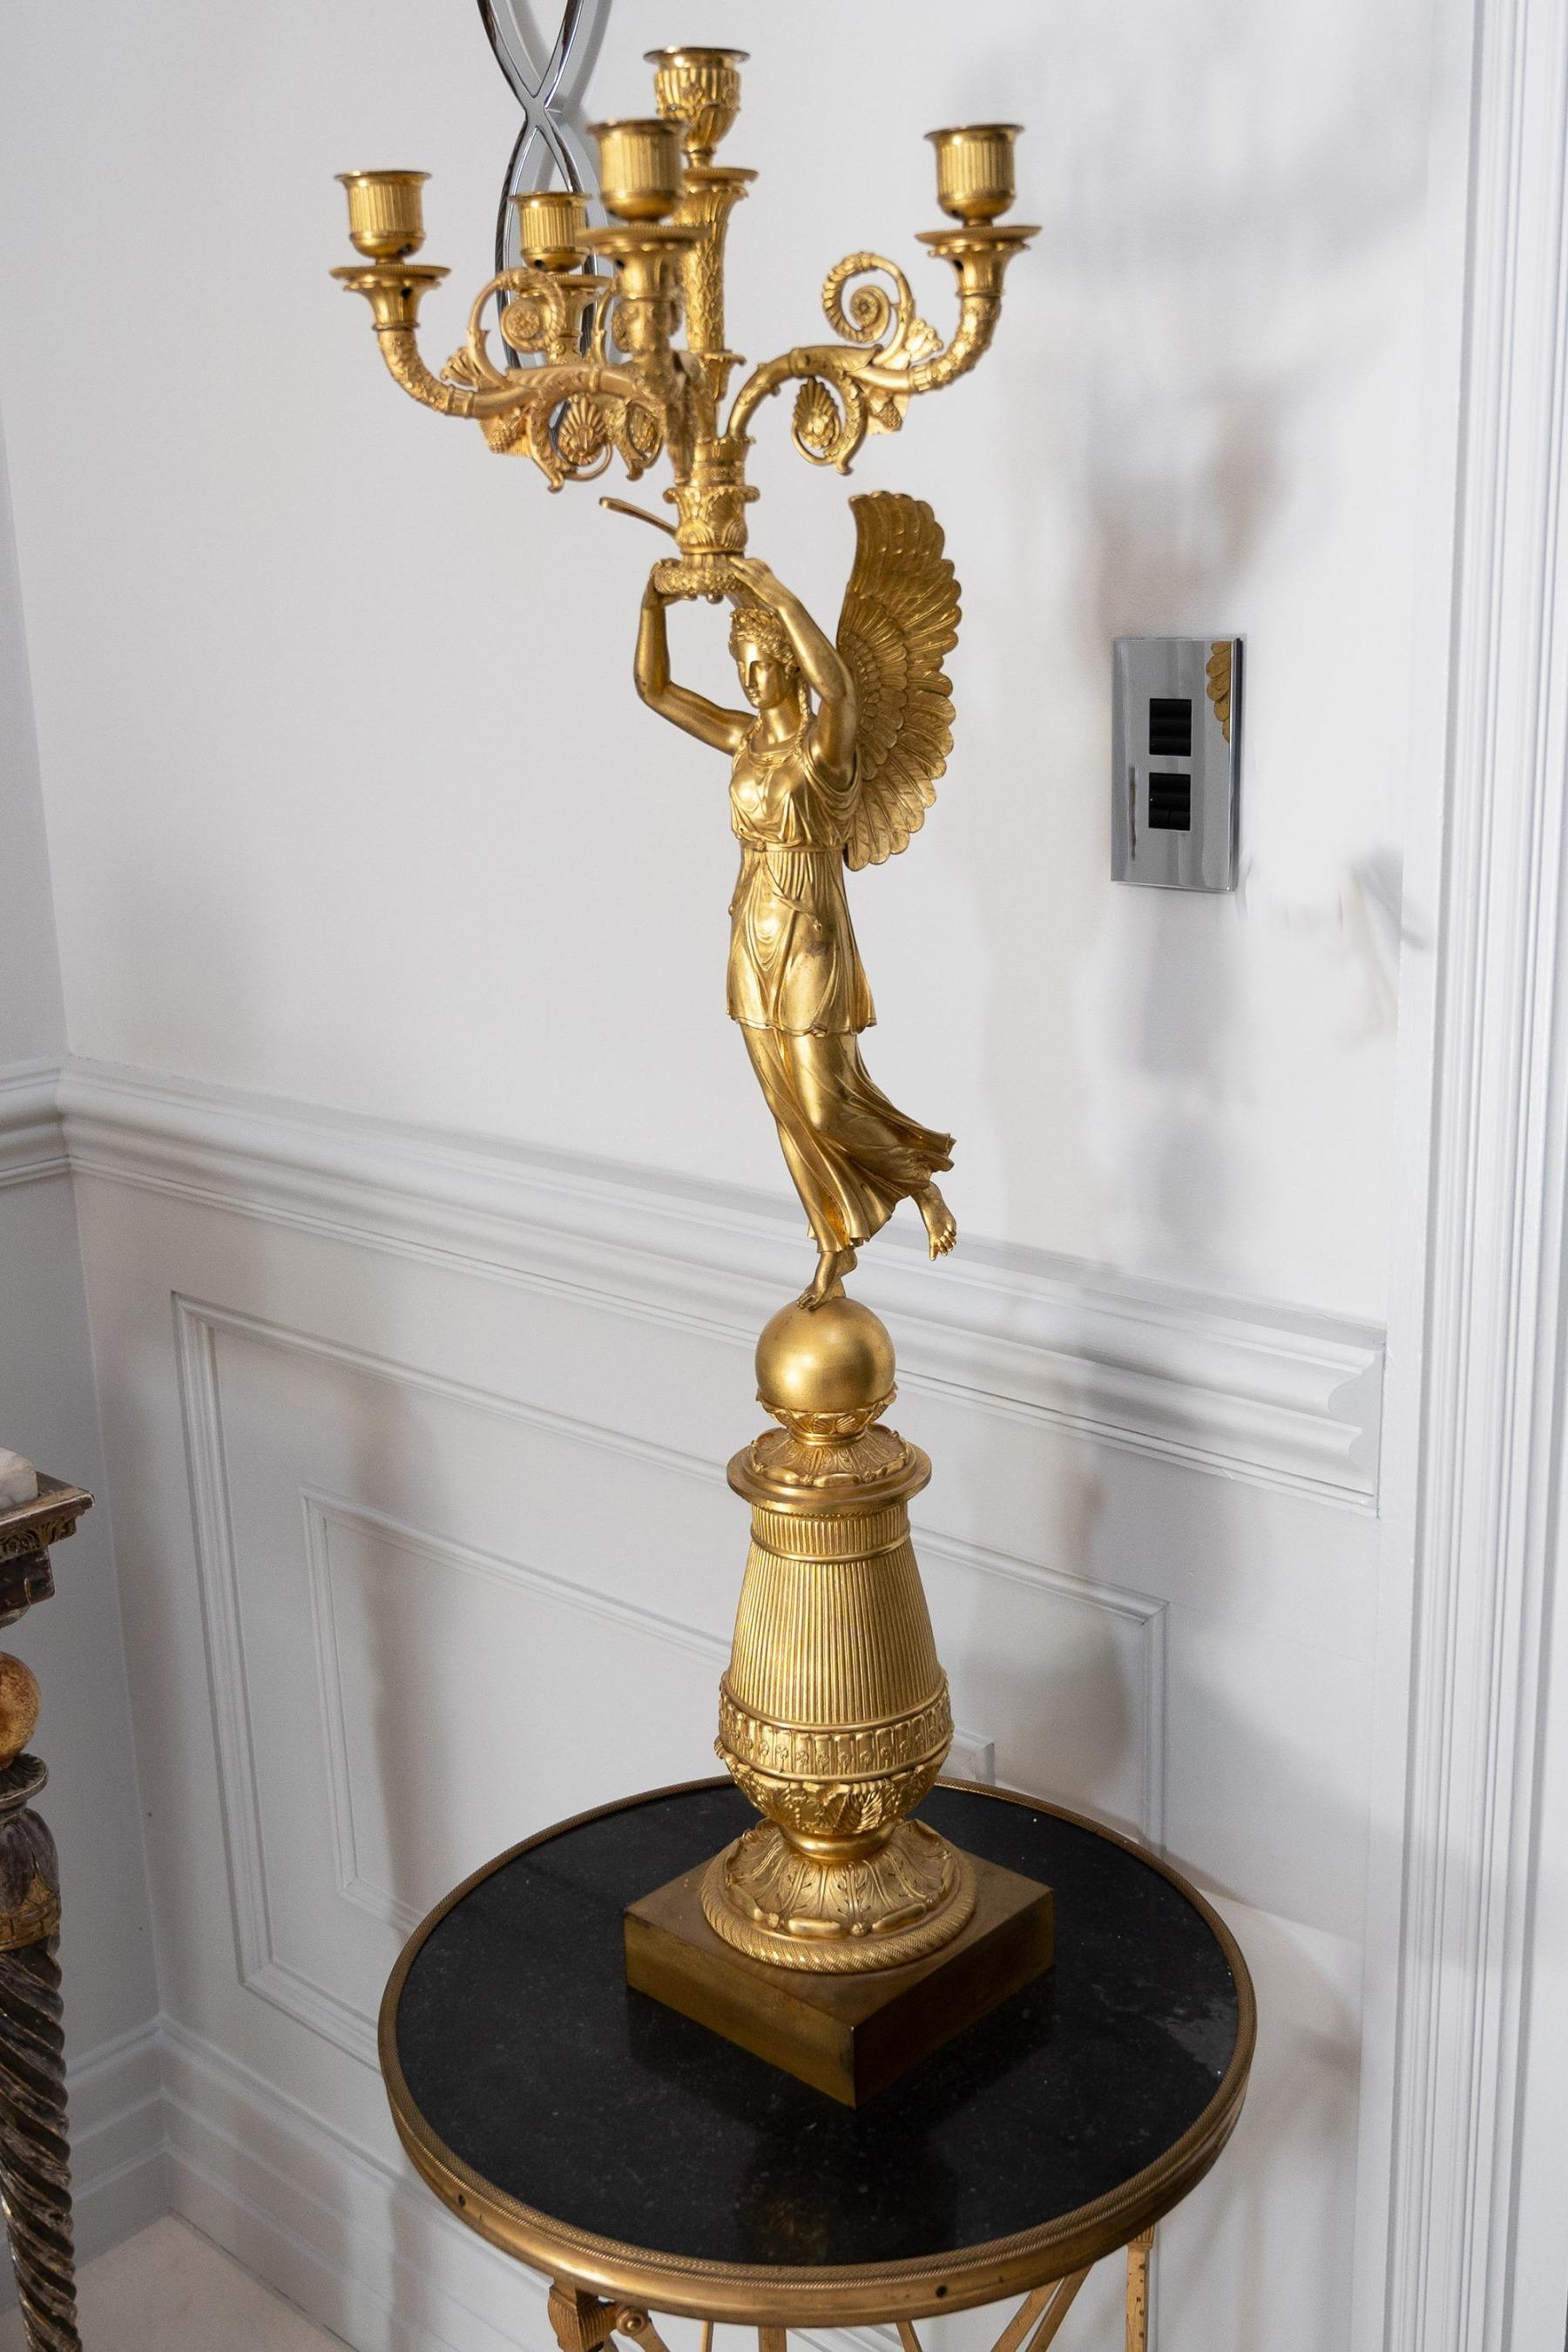 Exceptional Pair of French Late Empire Gilt-bronze Candelabra Attributed to Pier For Sale 5